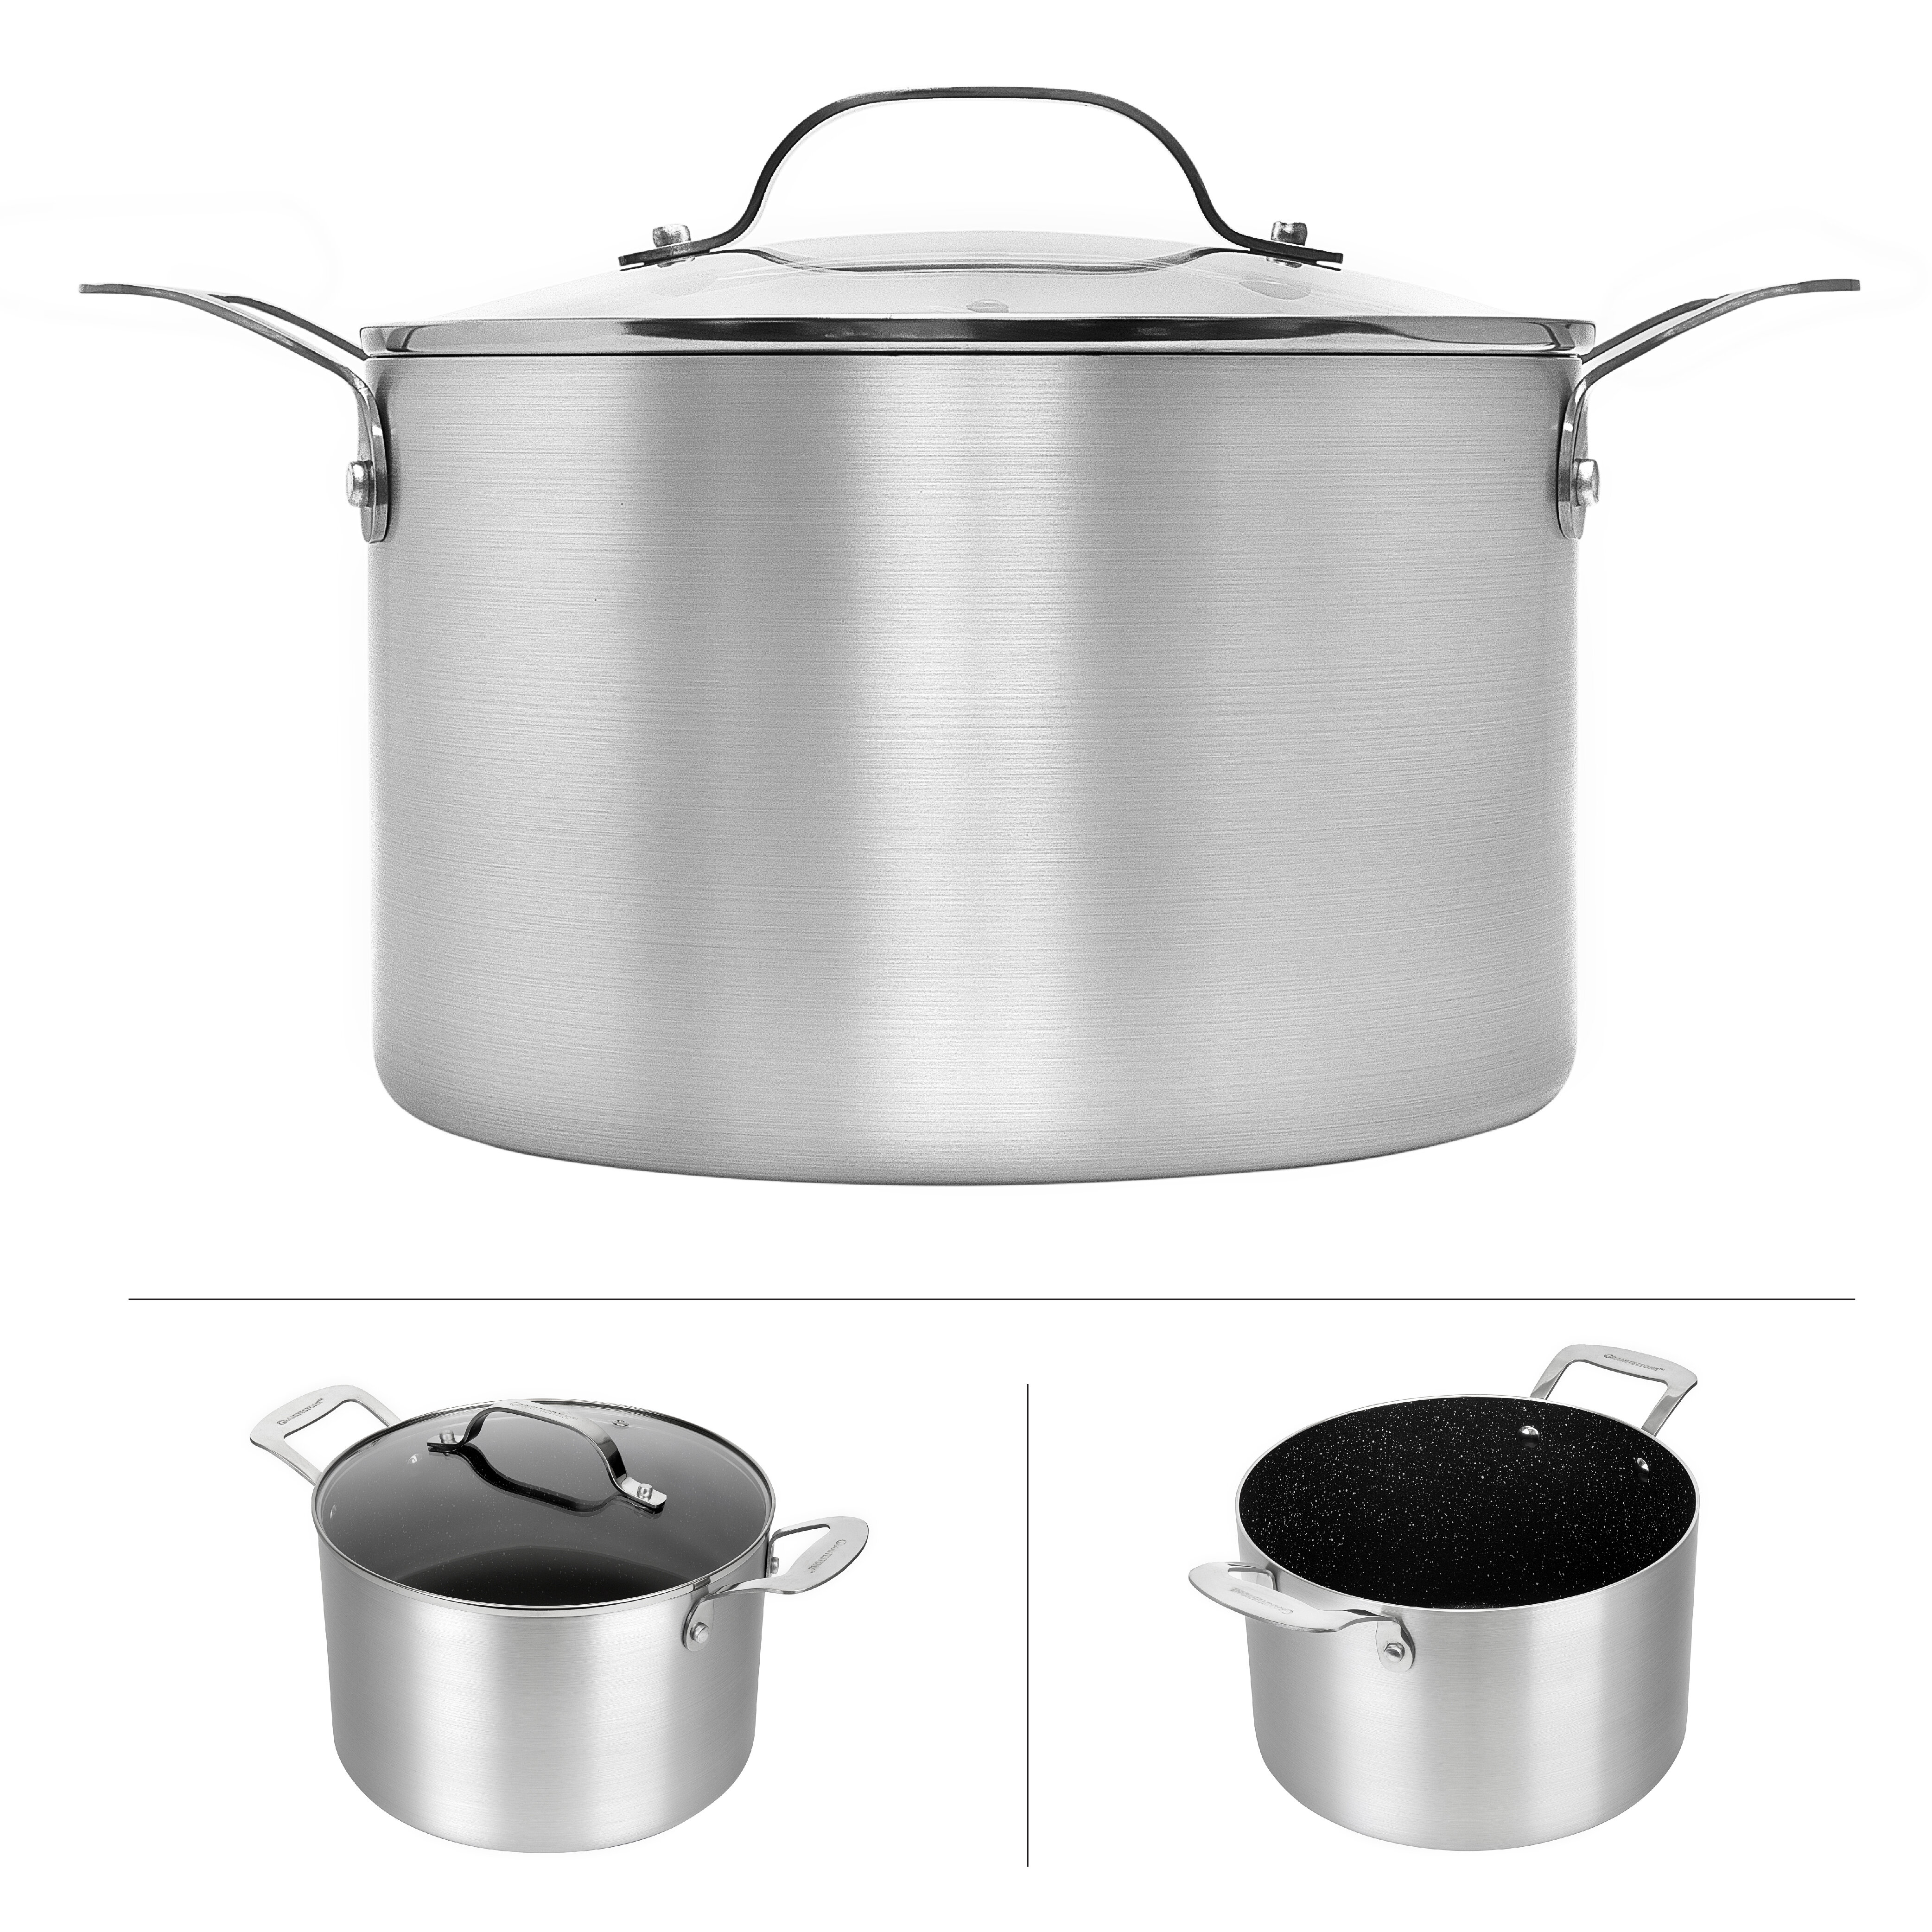 Cooks Standard 7-Quart Classic Stainless Steel Dutch Oven Casserole Stockpot with Lid